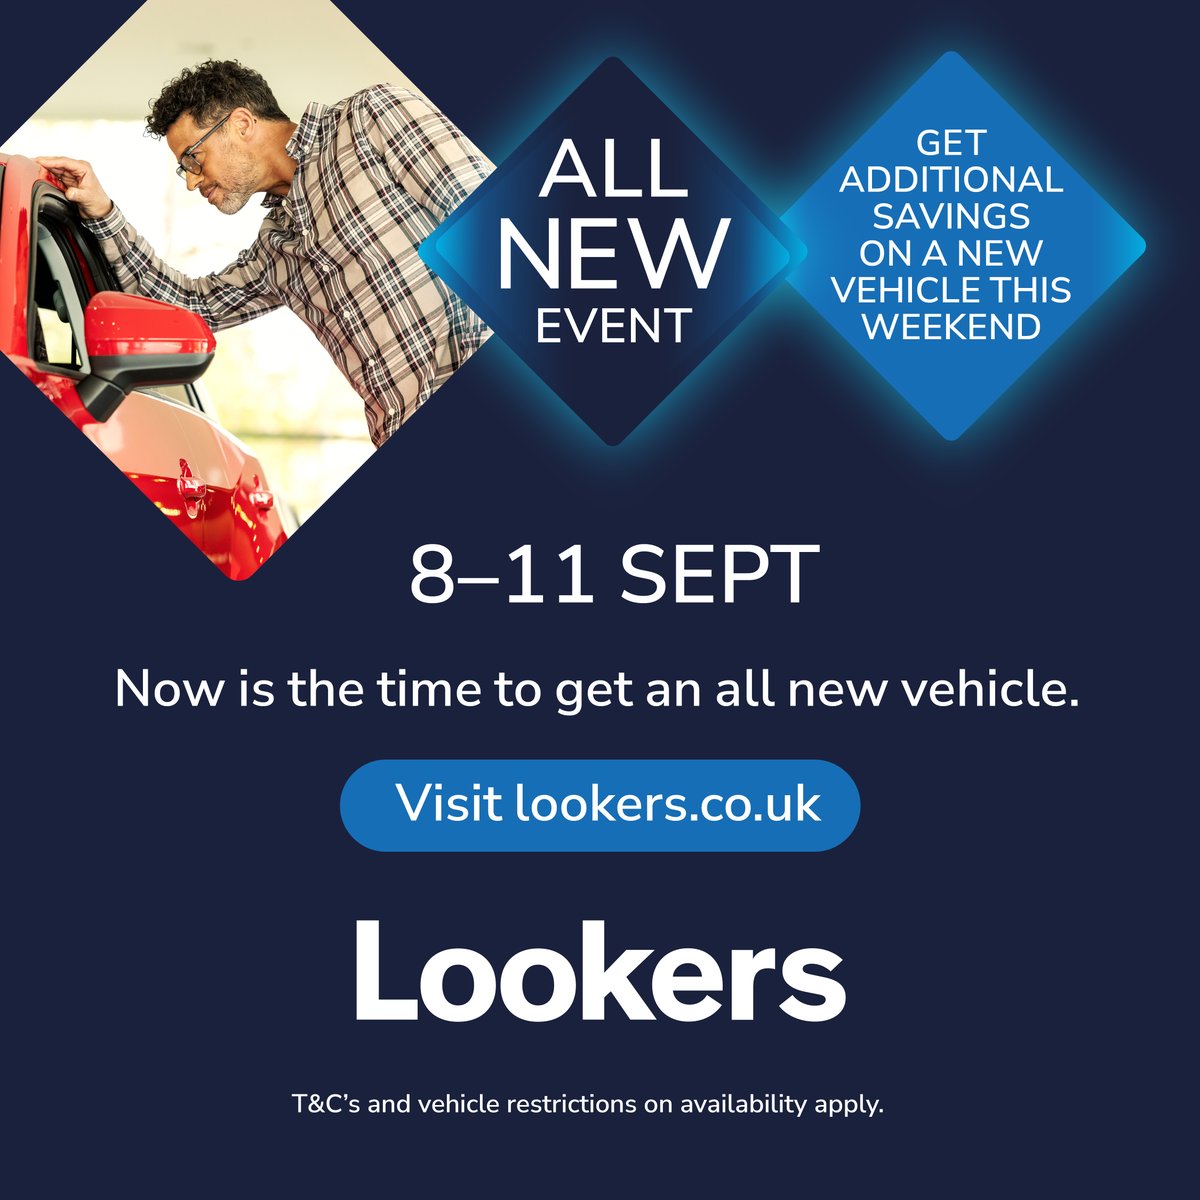 It’s your last chance to shop the All-New Event! Get behind the wheel of your dream vehicle today. Shop here: ow.ly/vREL50PJ8TB Offer ends September 11, T&Cs and vehicle availability restrictions apply. #ChooseLookers #AllNewEvent